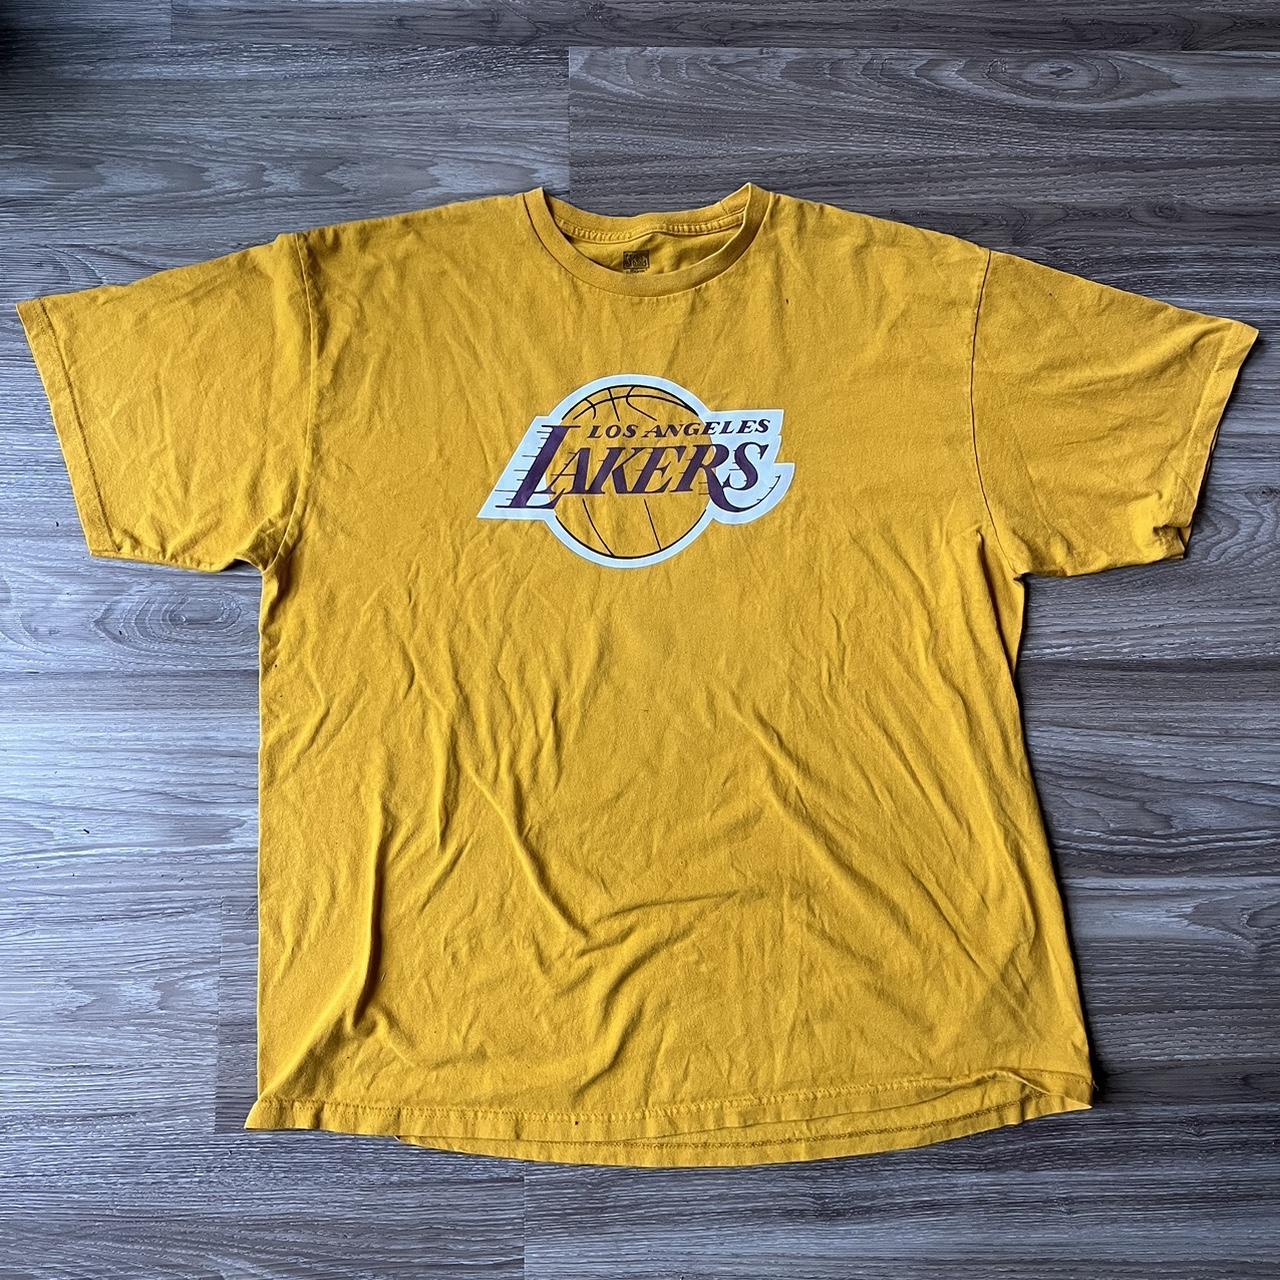 Vintage showtime promo tee Good condition #lakers - Depop